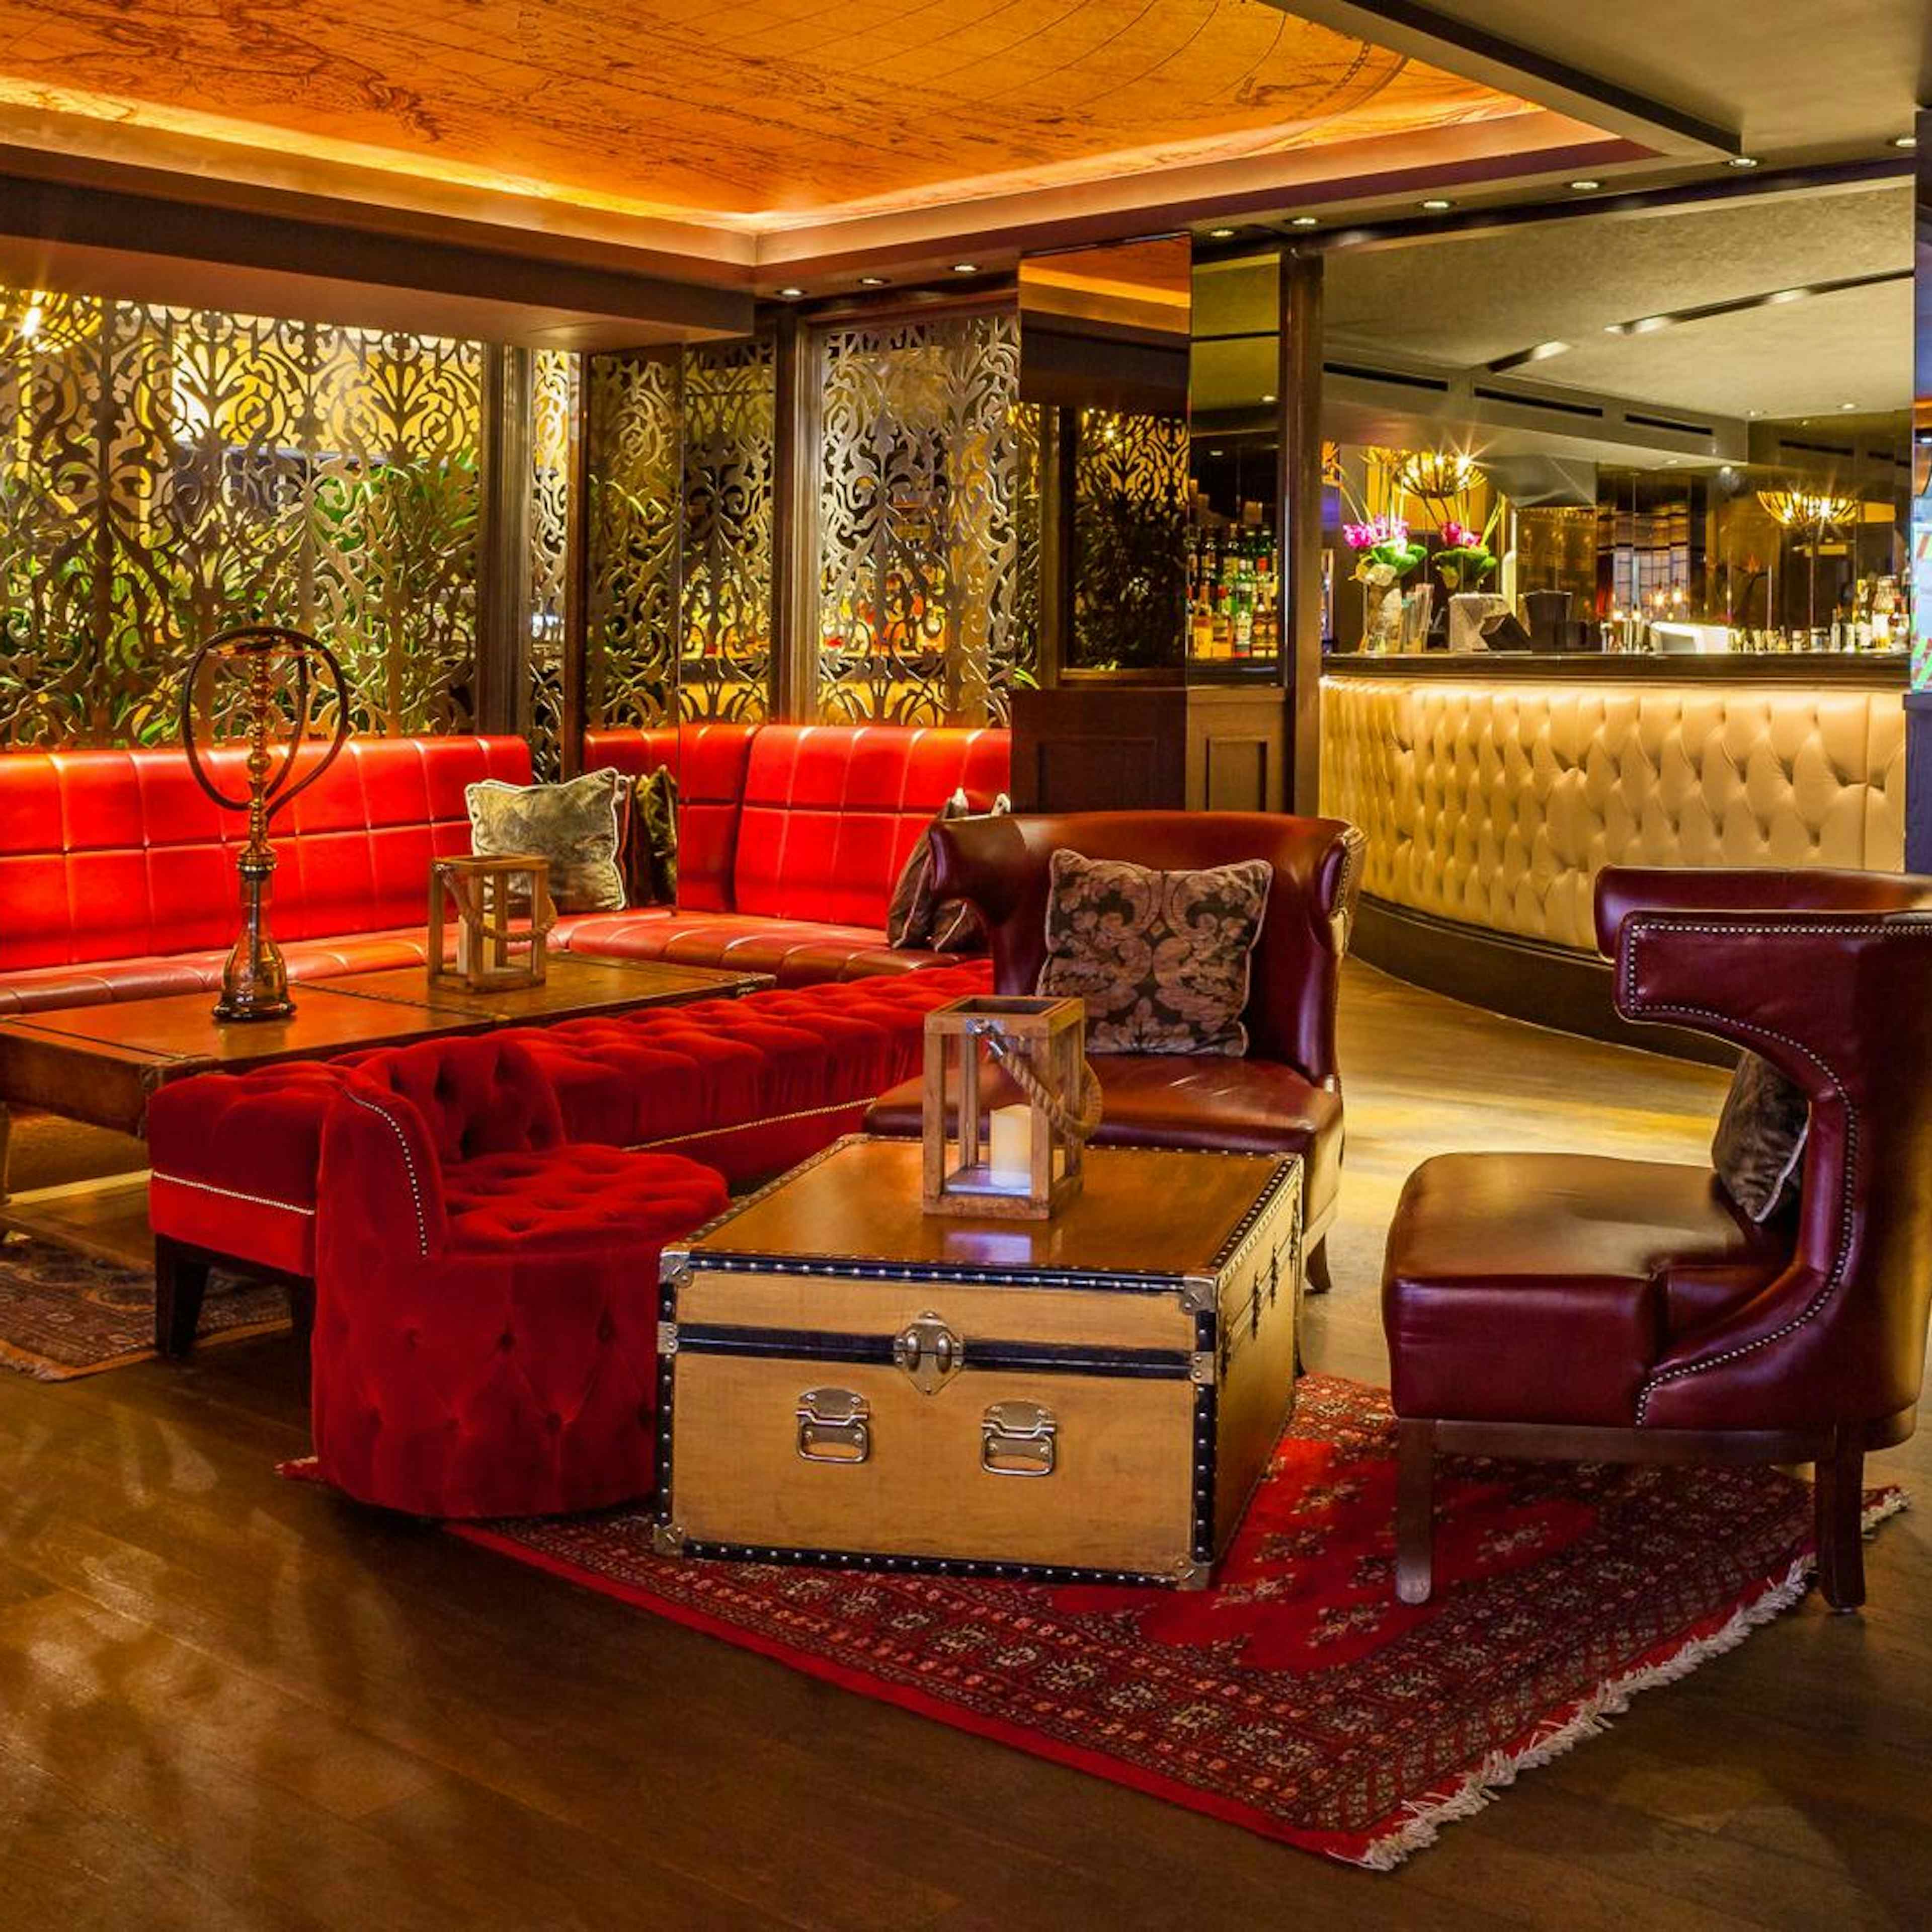 The Palm Beach - The Lounge image 2